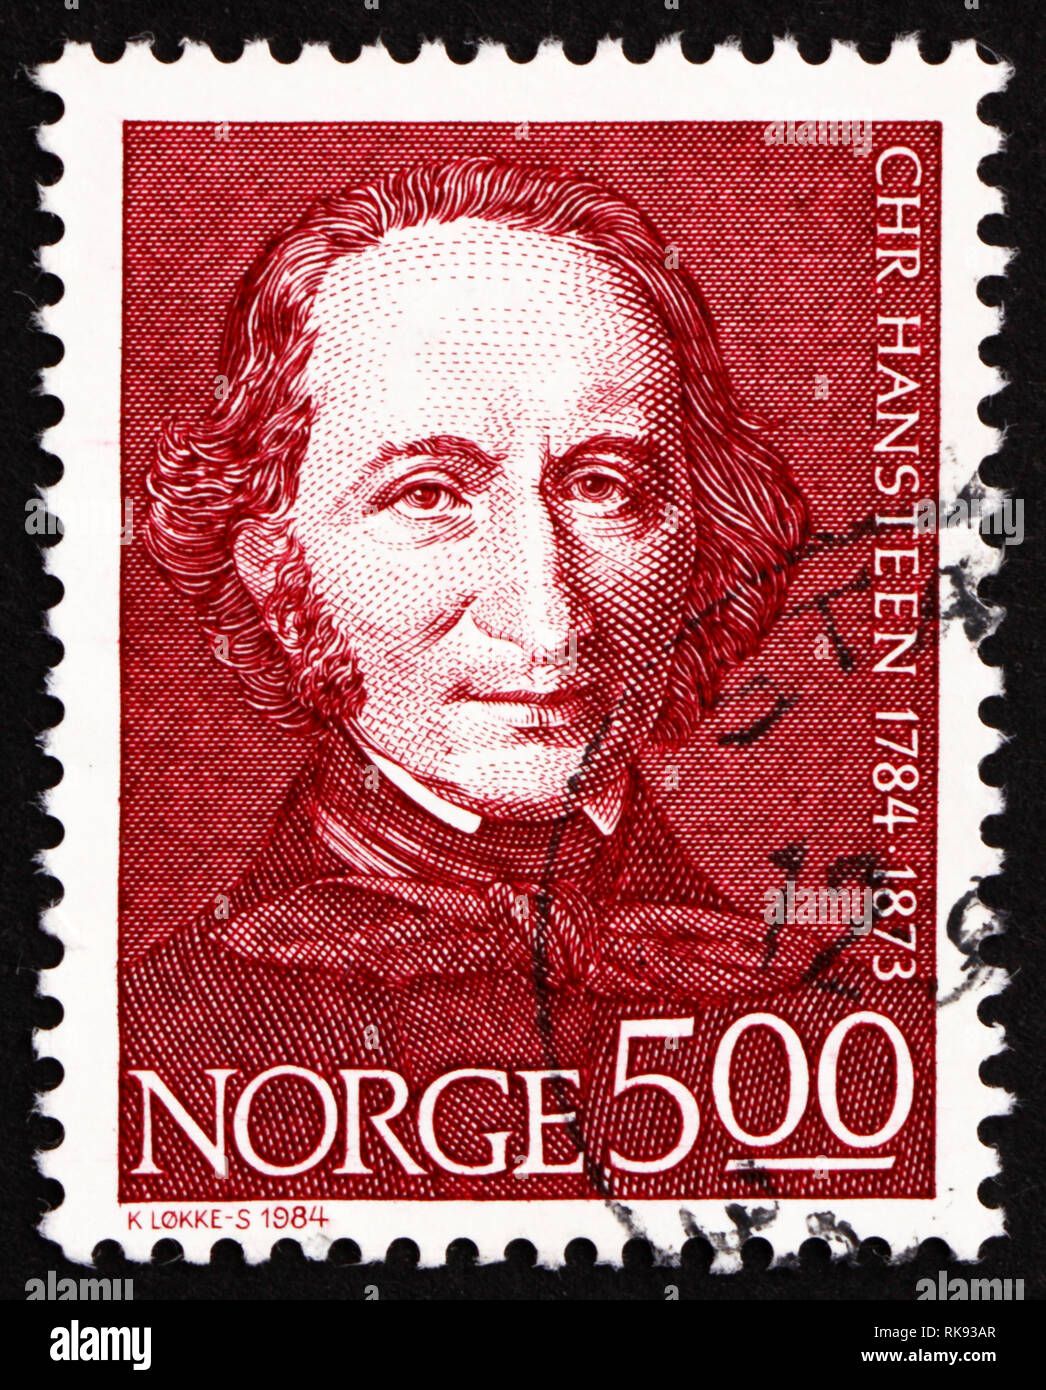 NORWAY - CIRCA 1984: a stamp printed in the Norway shows Christopher Hansteen, Astronomer, circa 1984 Stock Photo